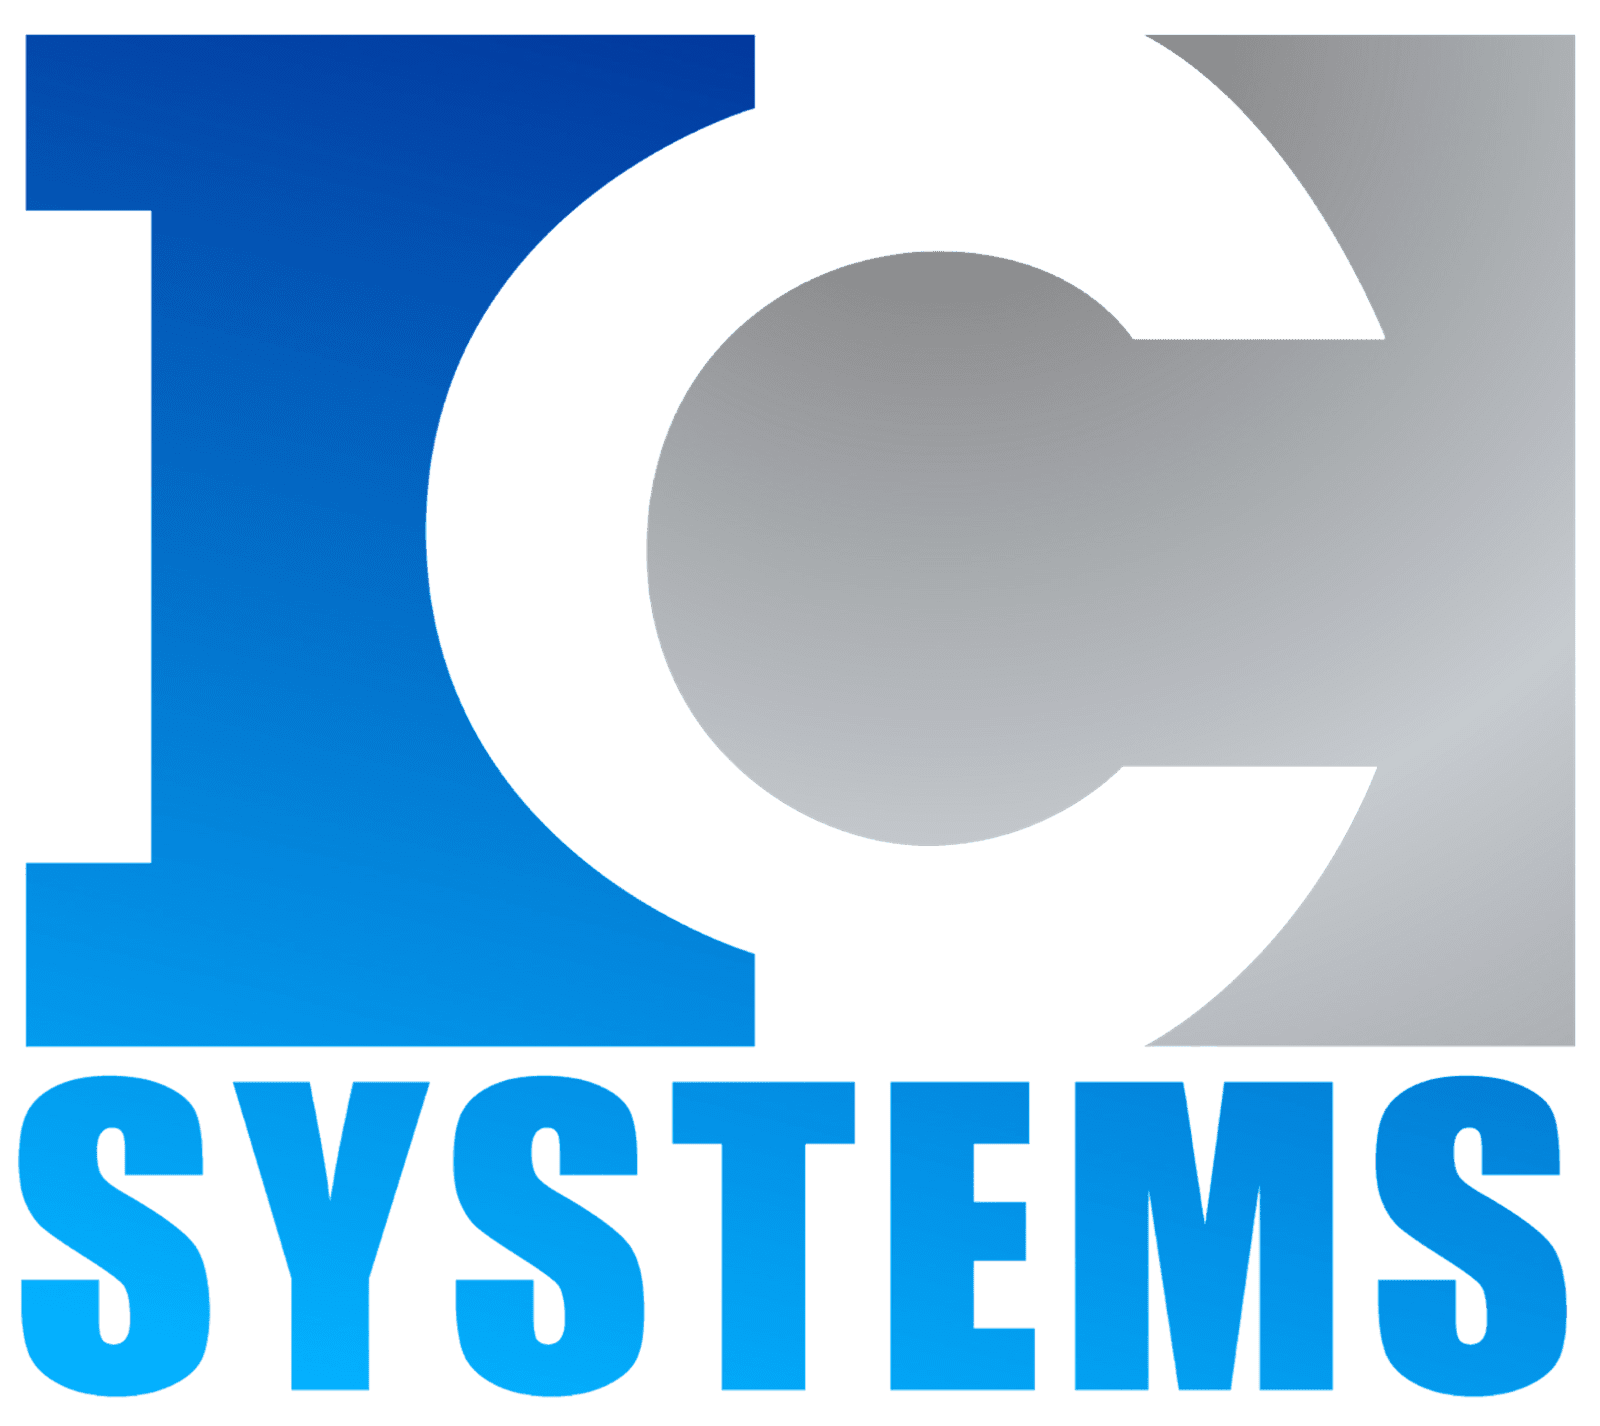 (c) Ic-systems.net